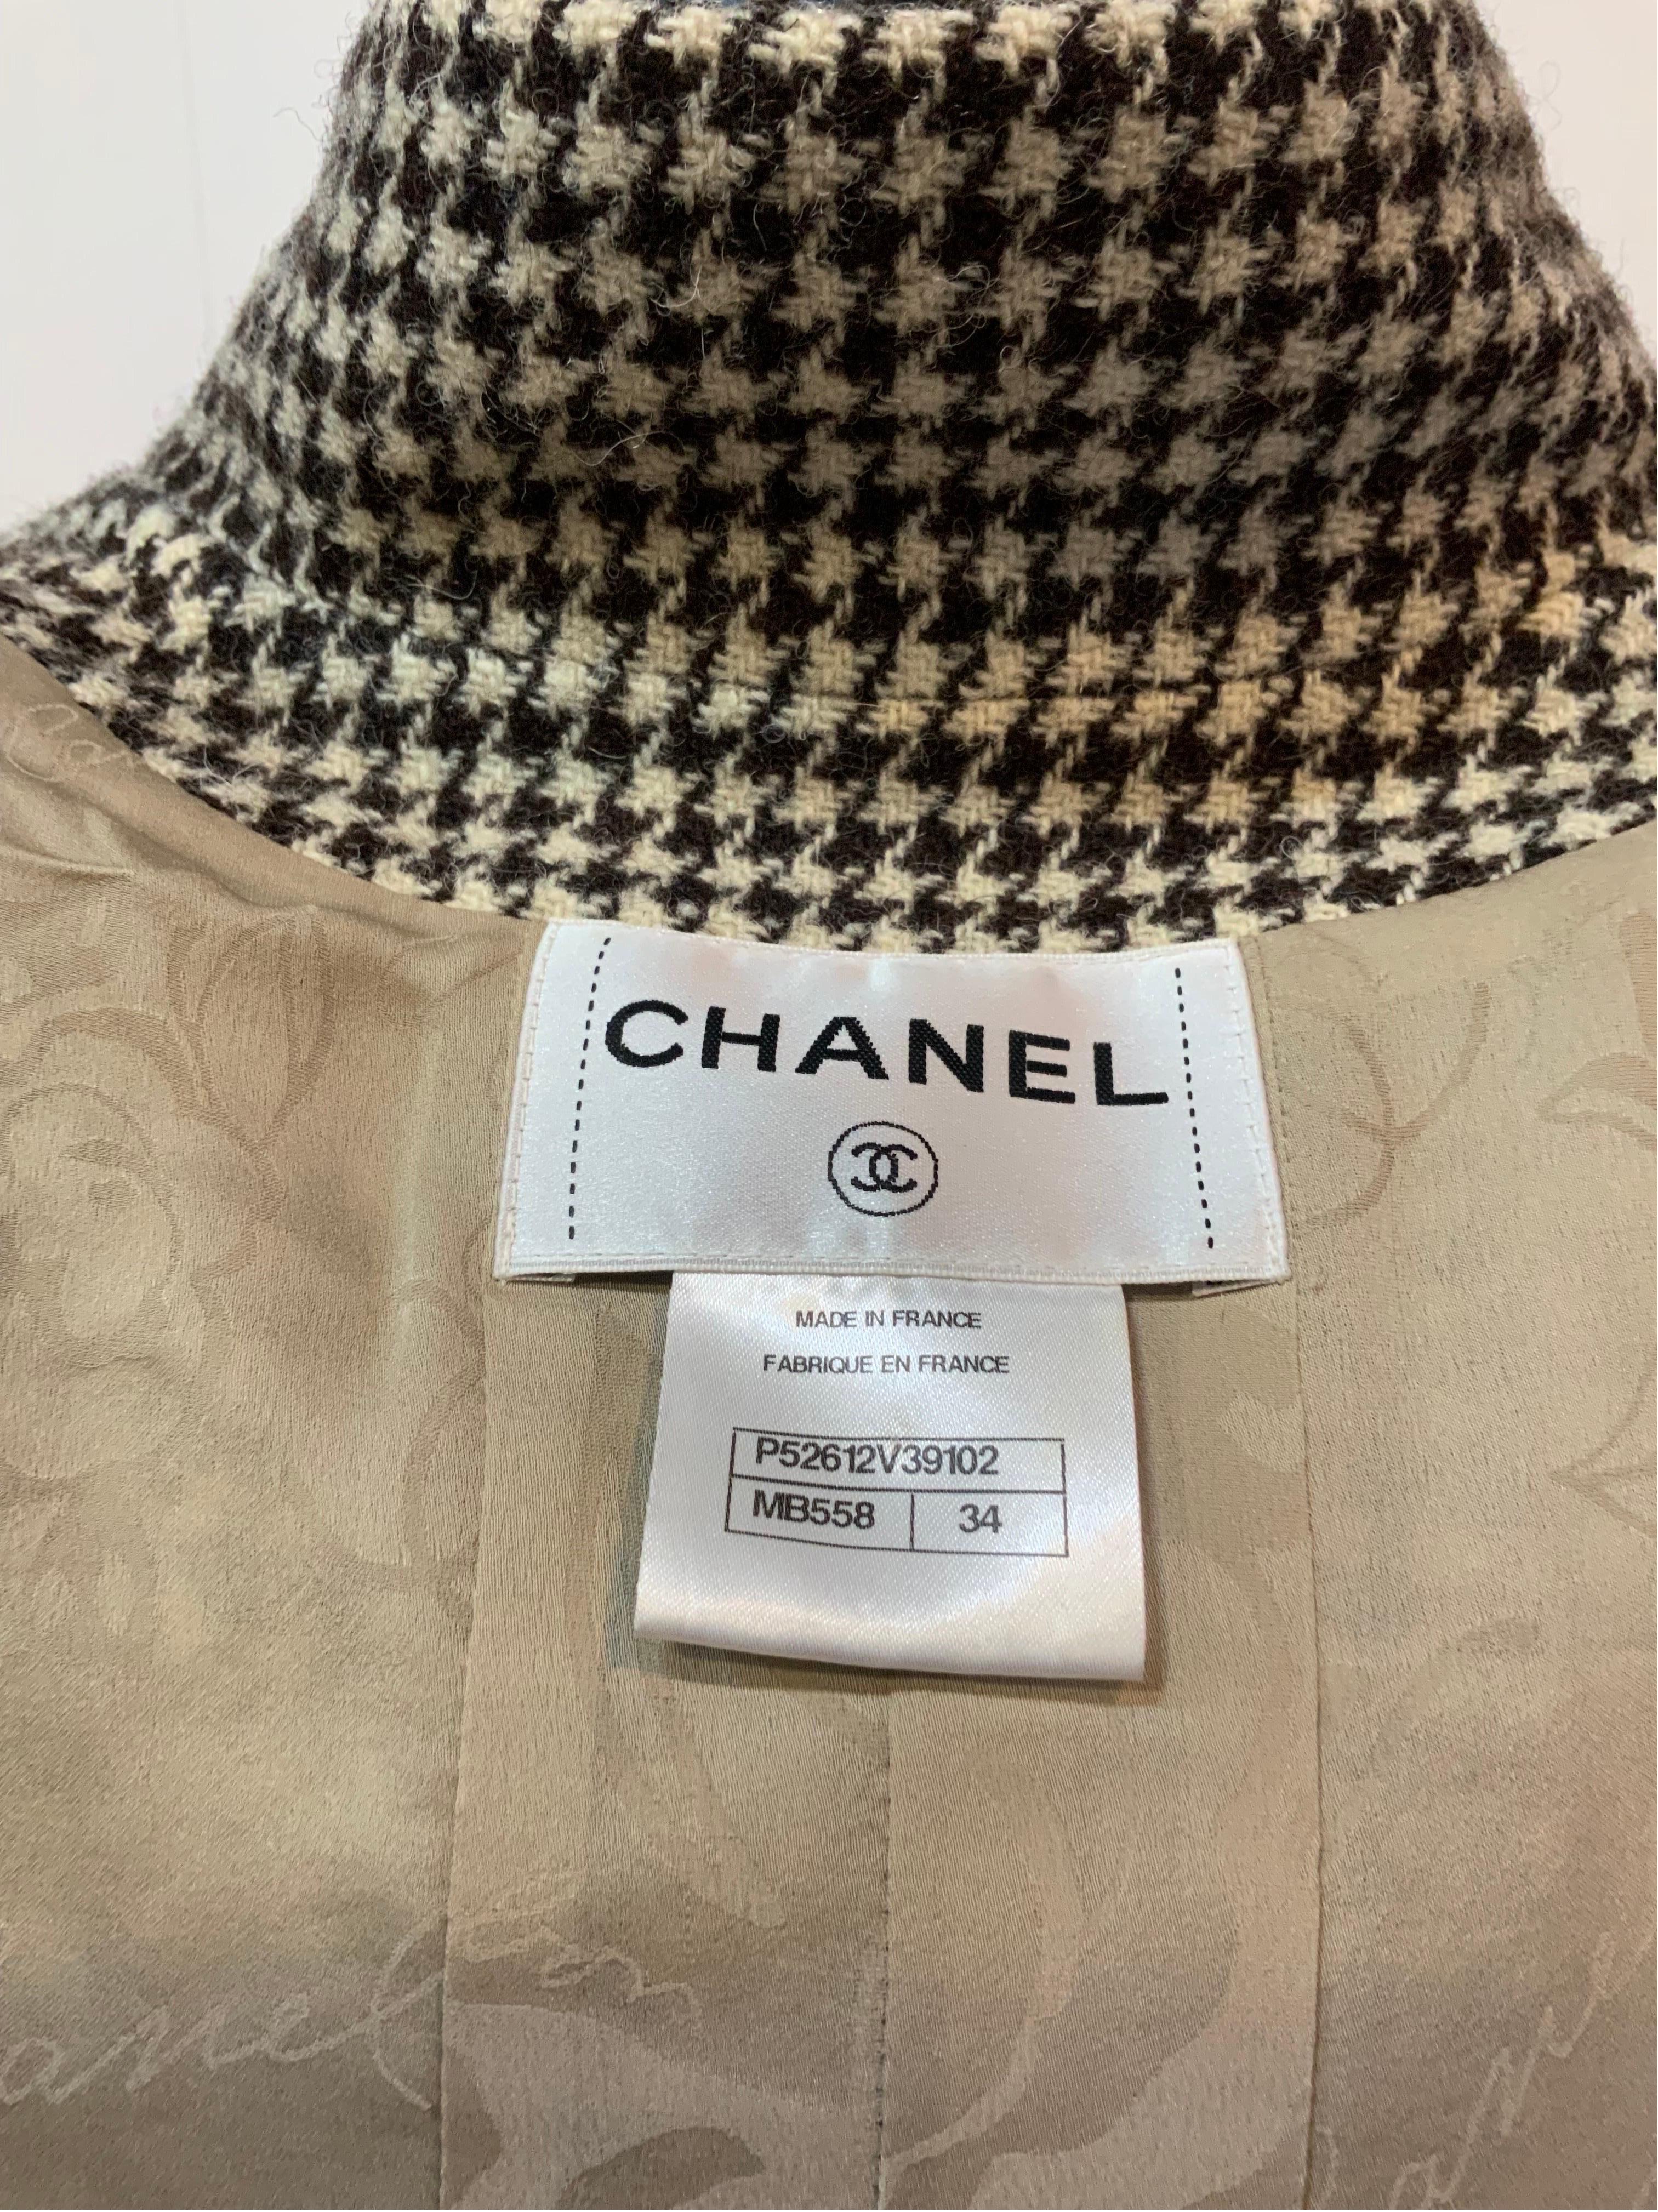 Chanel Fall 2015 RTW wool Jacket For Sale 1